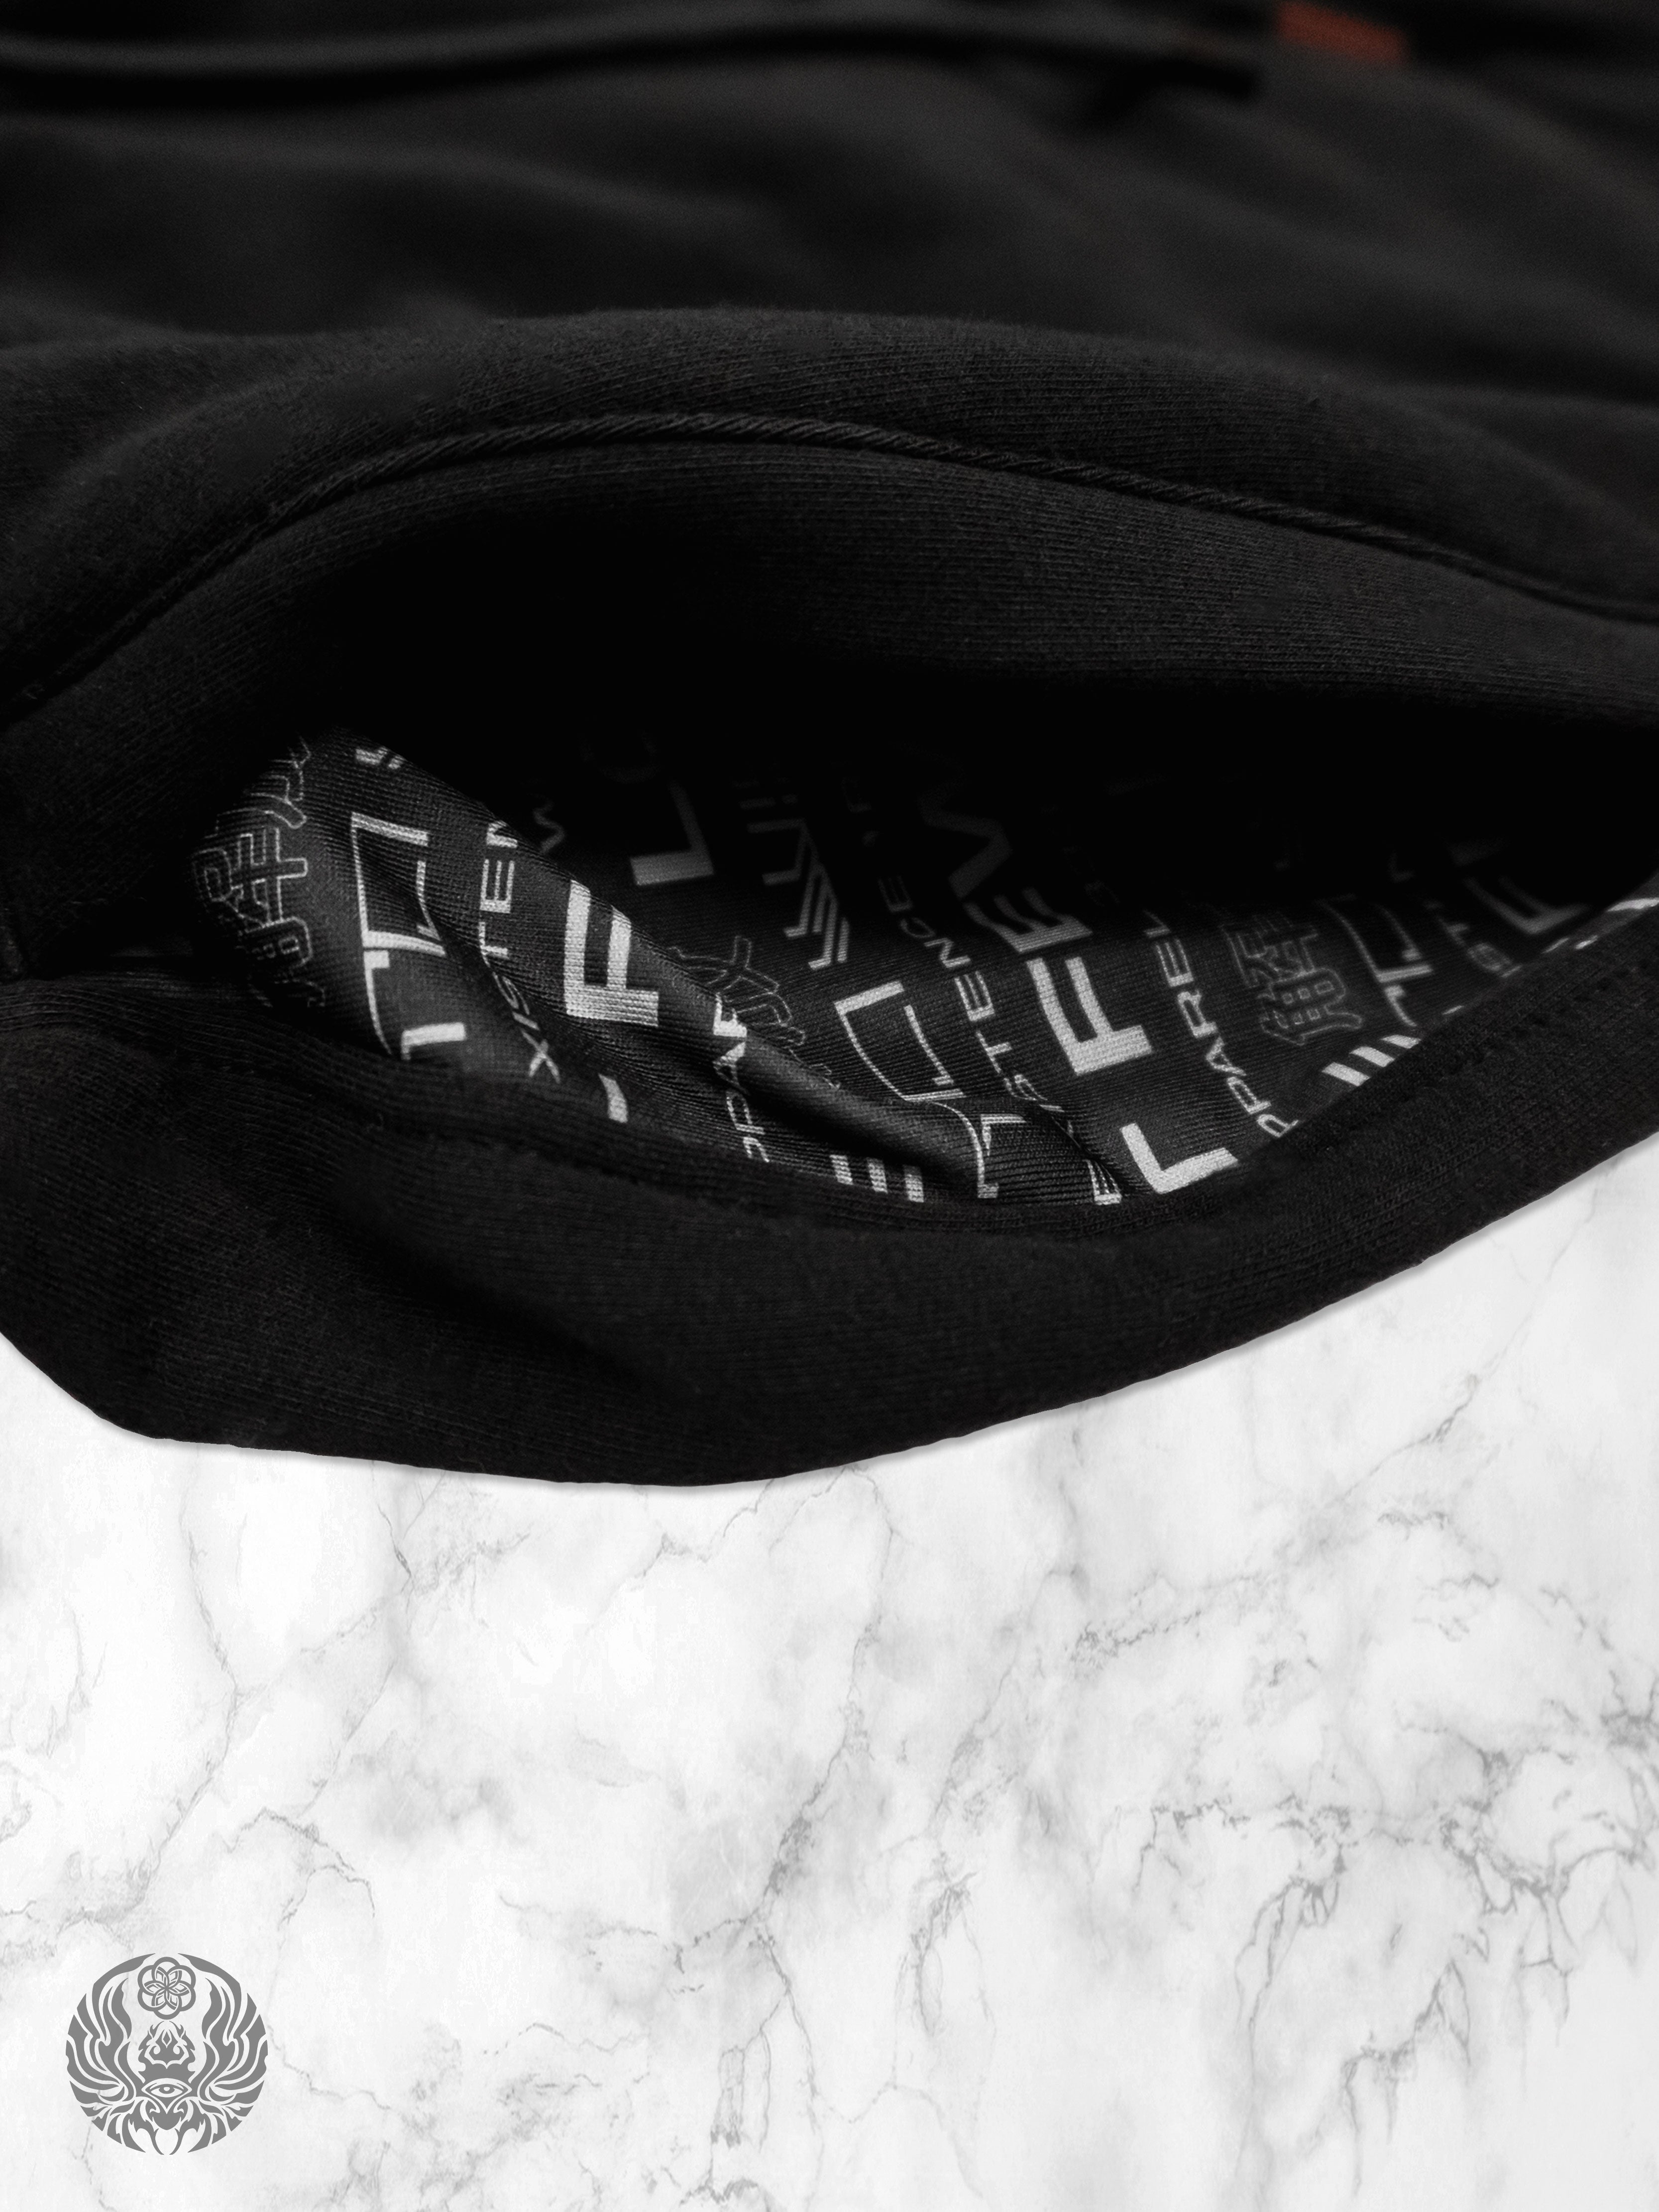 PRE-ORDER ✦ PROTECTED BY INTENT ✦ Premium Joggers w/ Hidden Pocket Coming Soon 